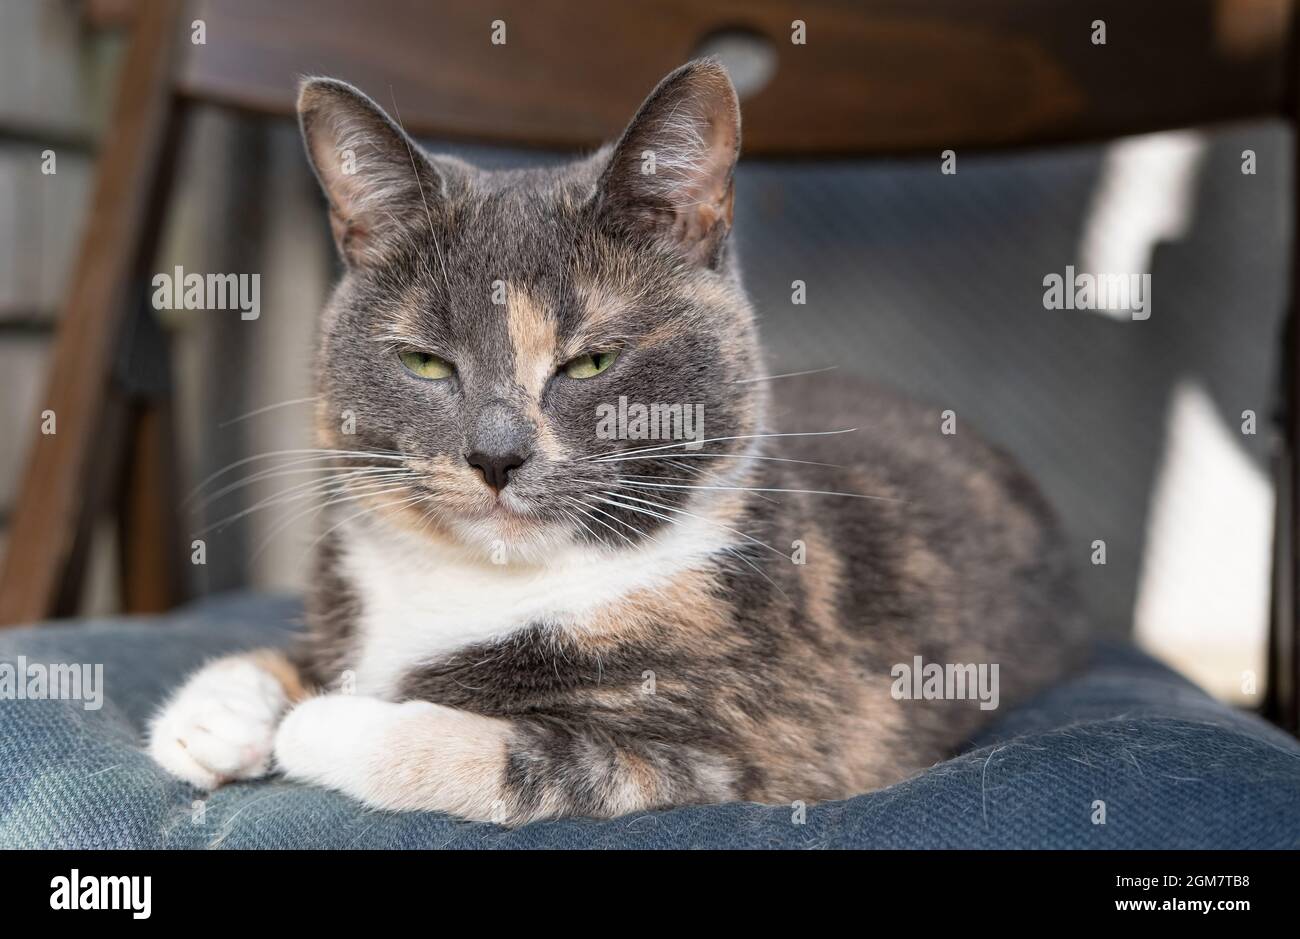 Dissatisfied cat lies on a soft chair and looks suspiciously narrowed eyes.  Stock Photo